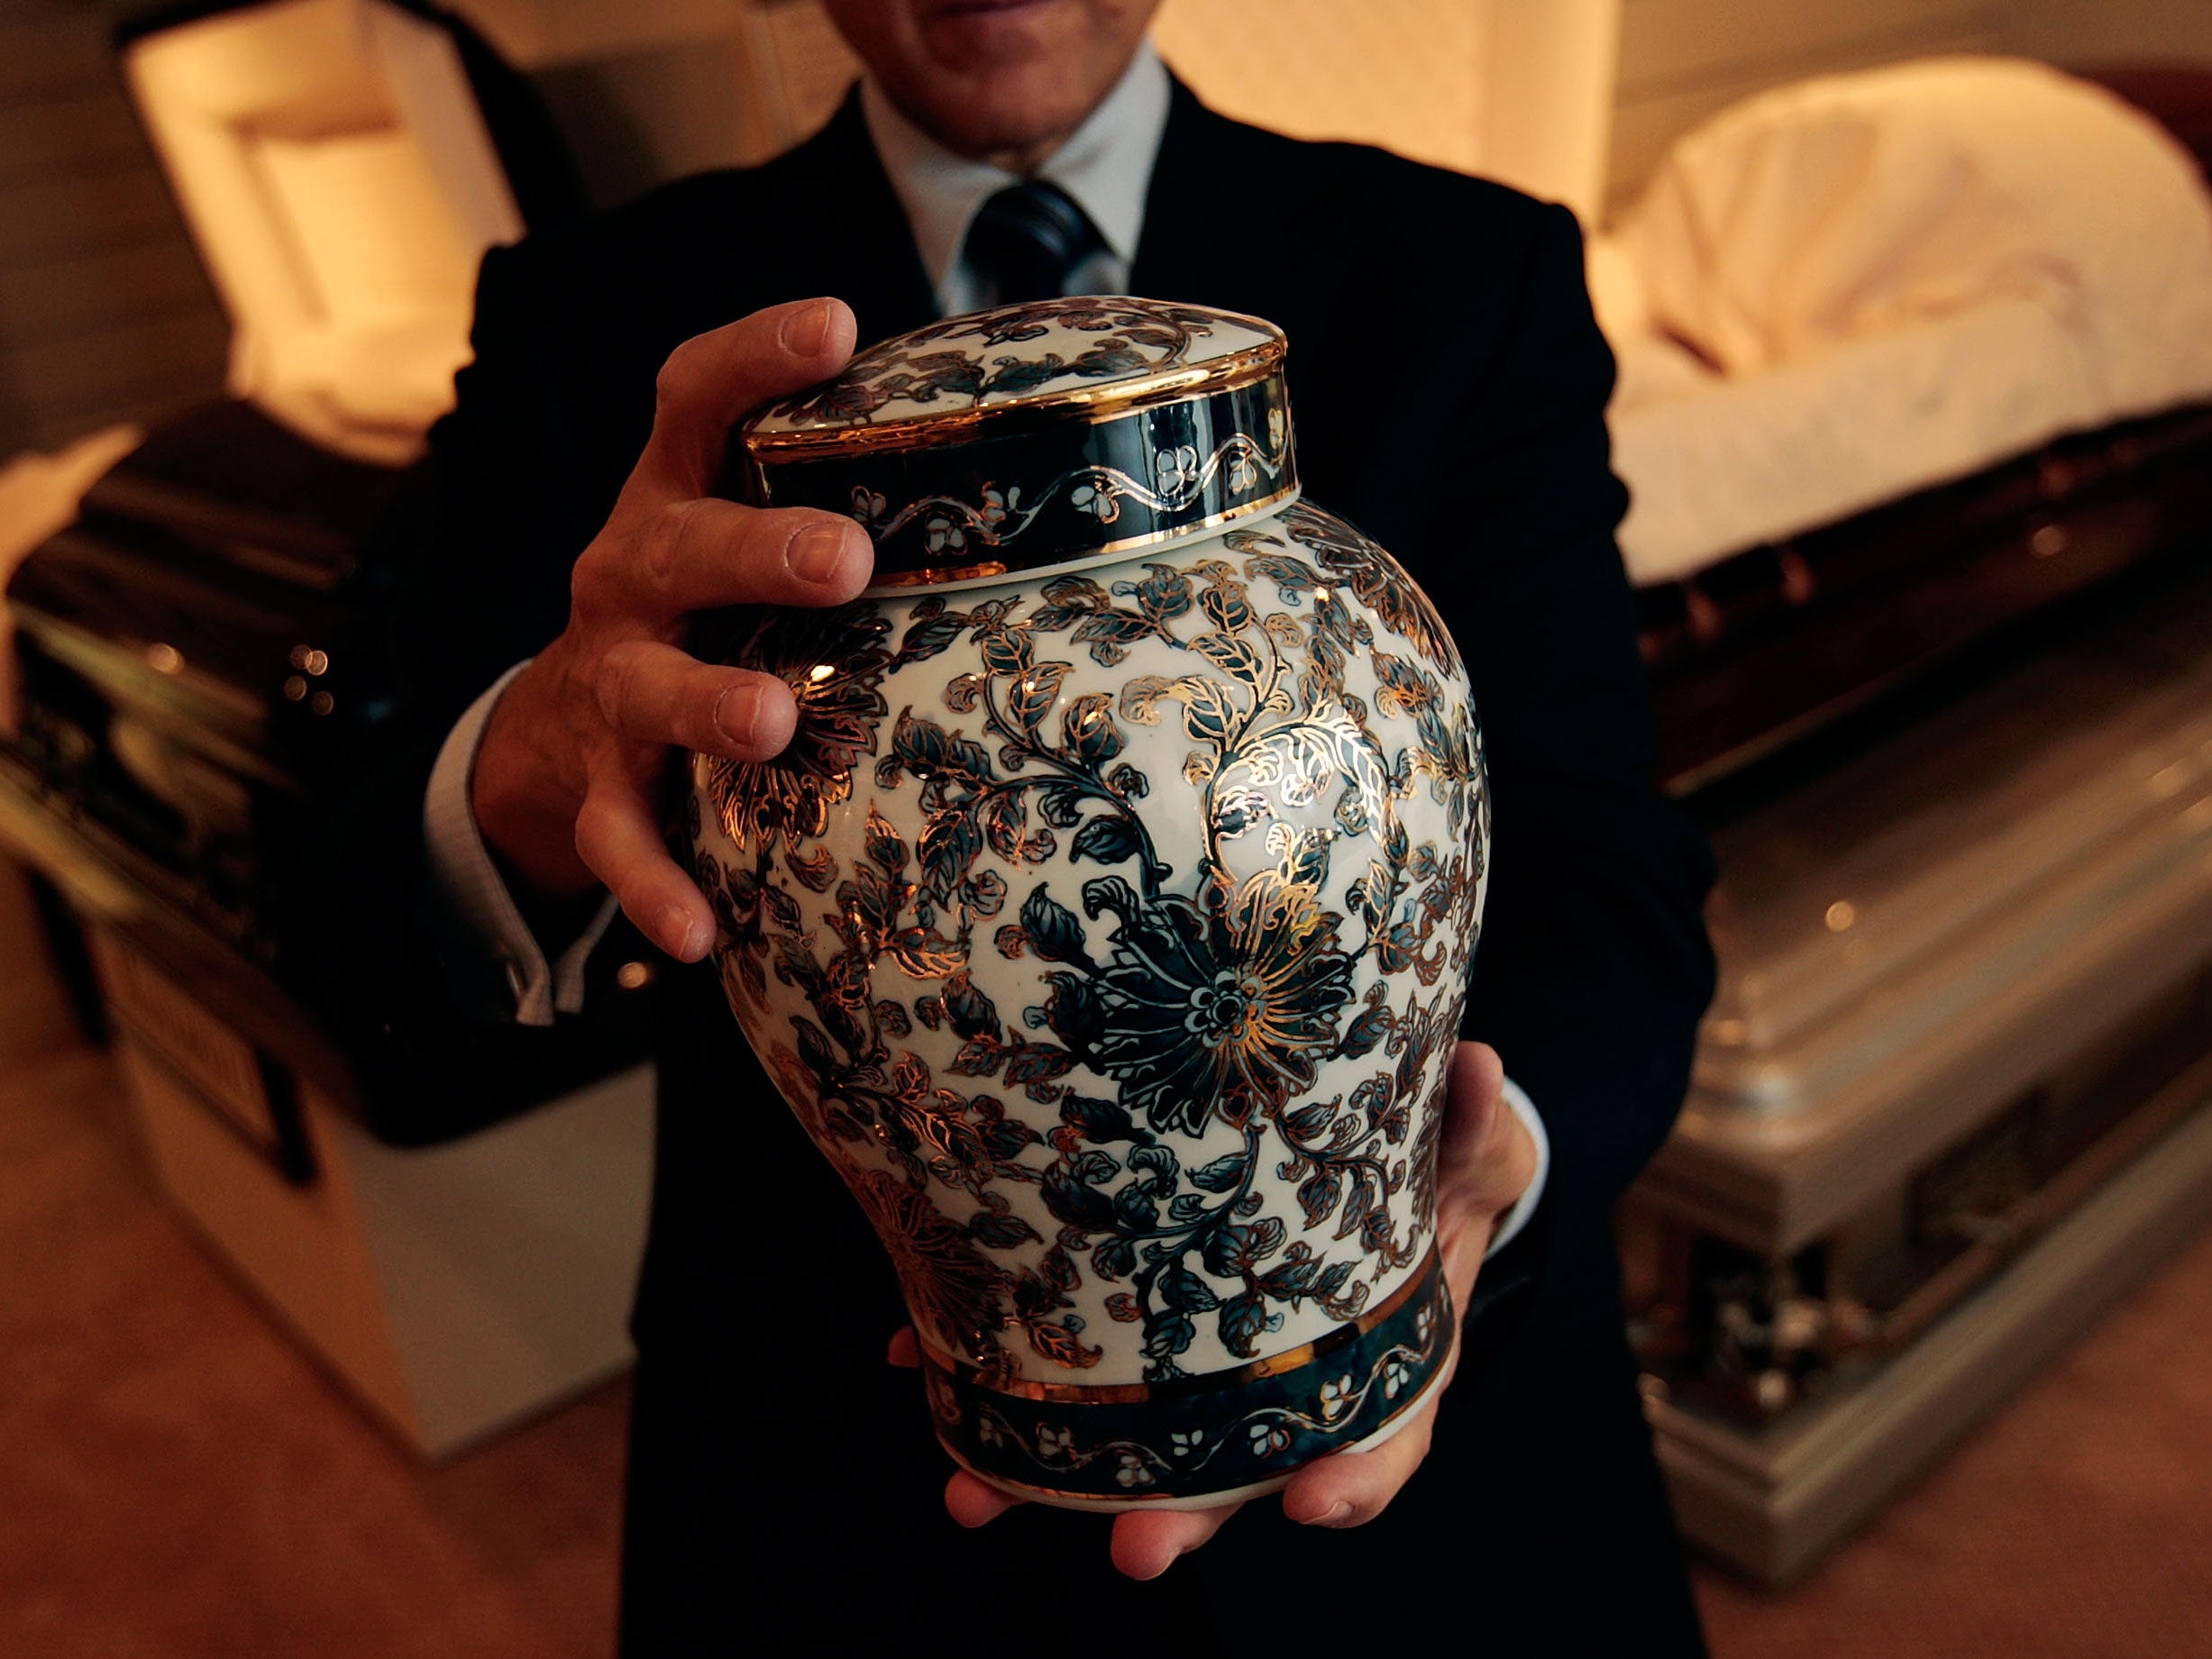 A funeral director holds an urn in his New York funeral home